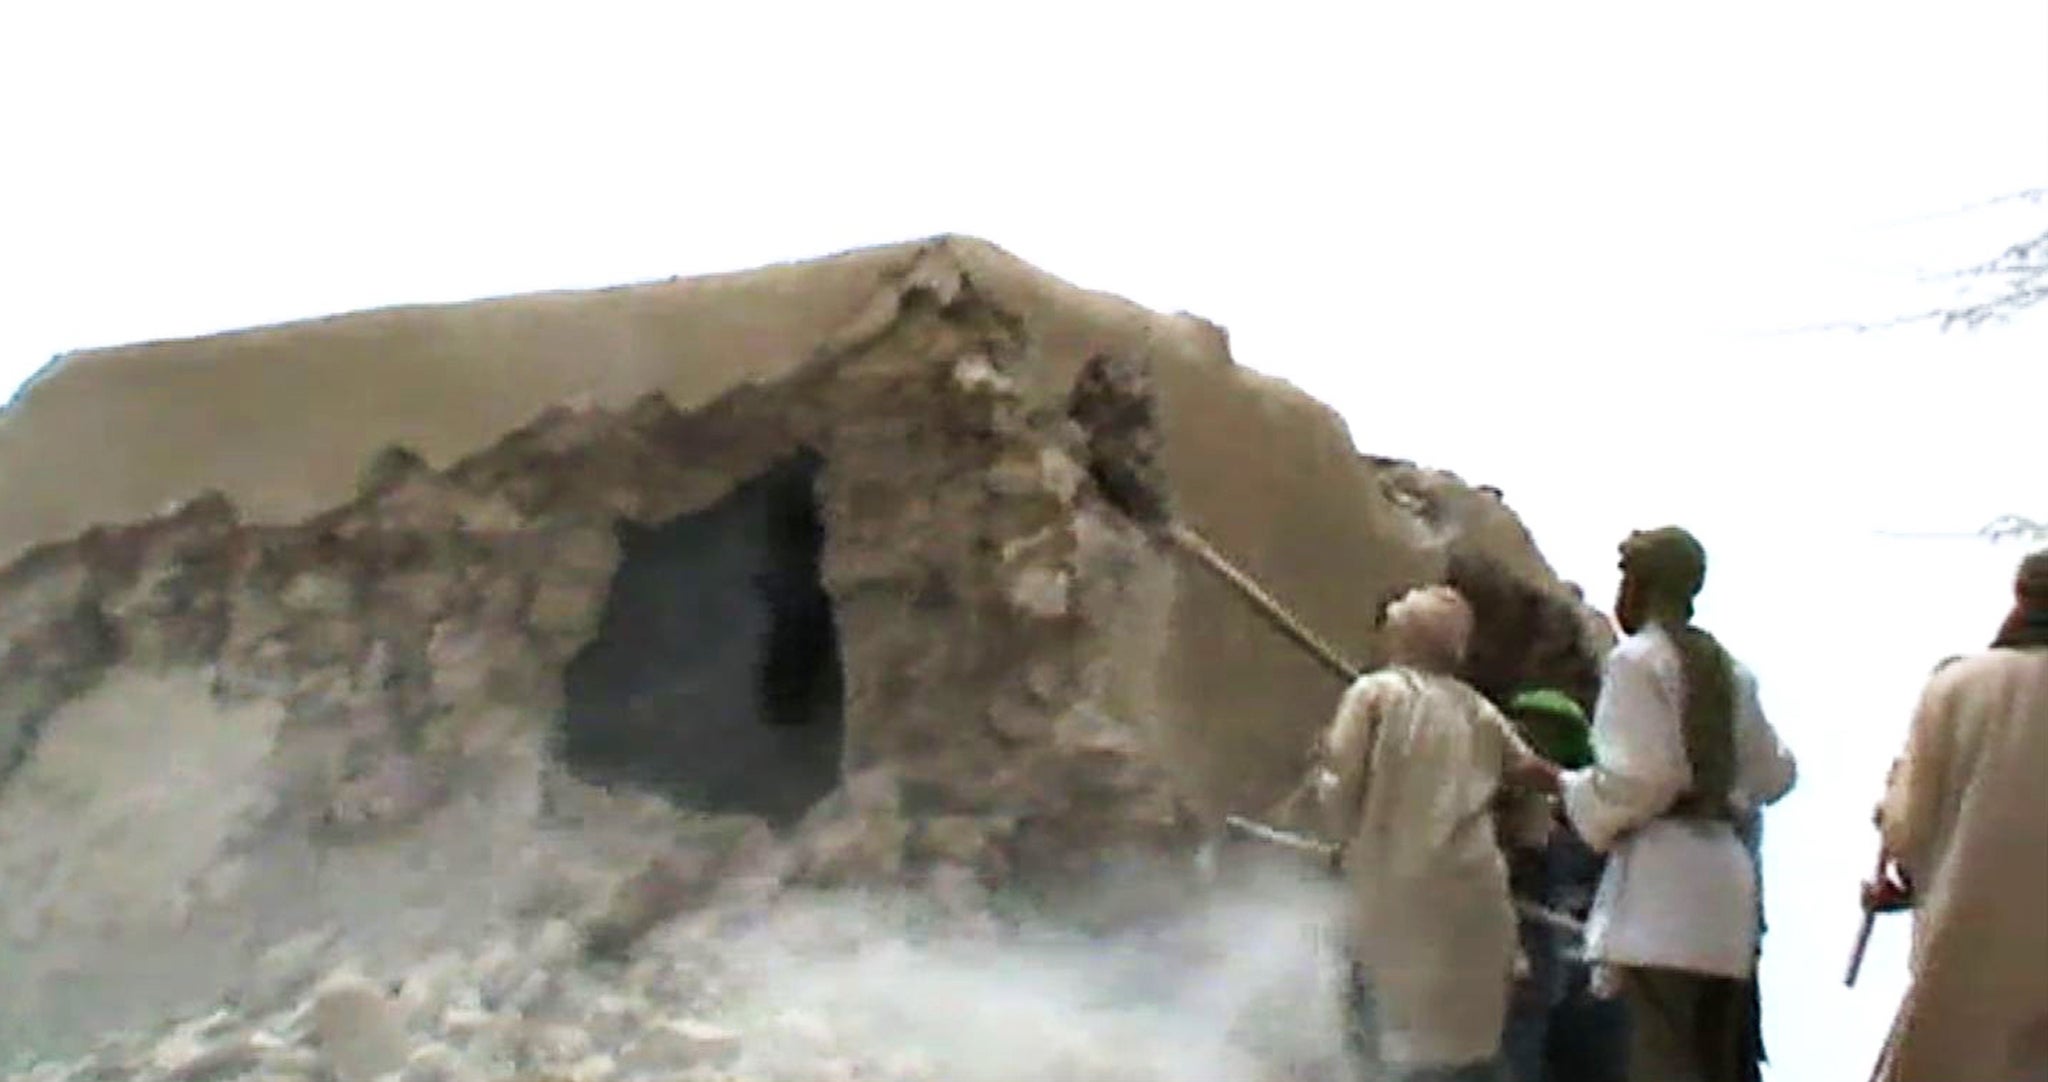 Islamist militants destroying an ancient shrine in Timbuktu on July 1, 2012